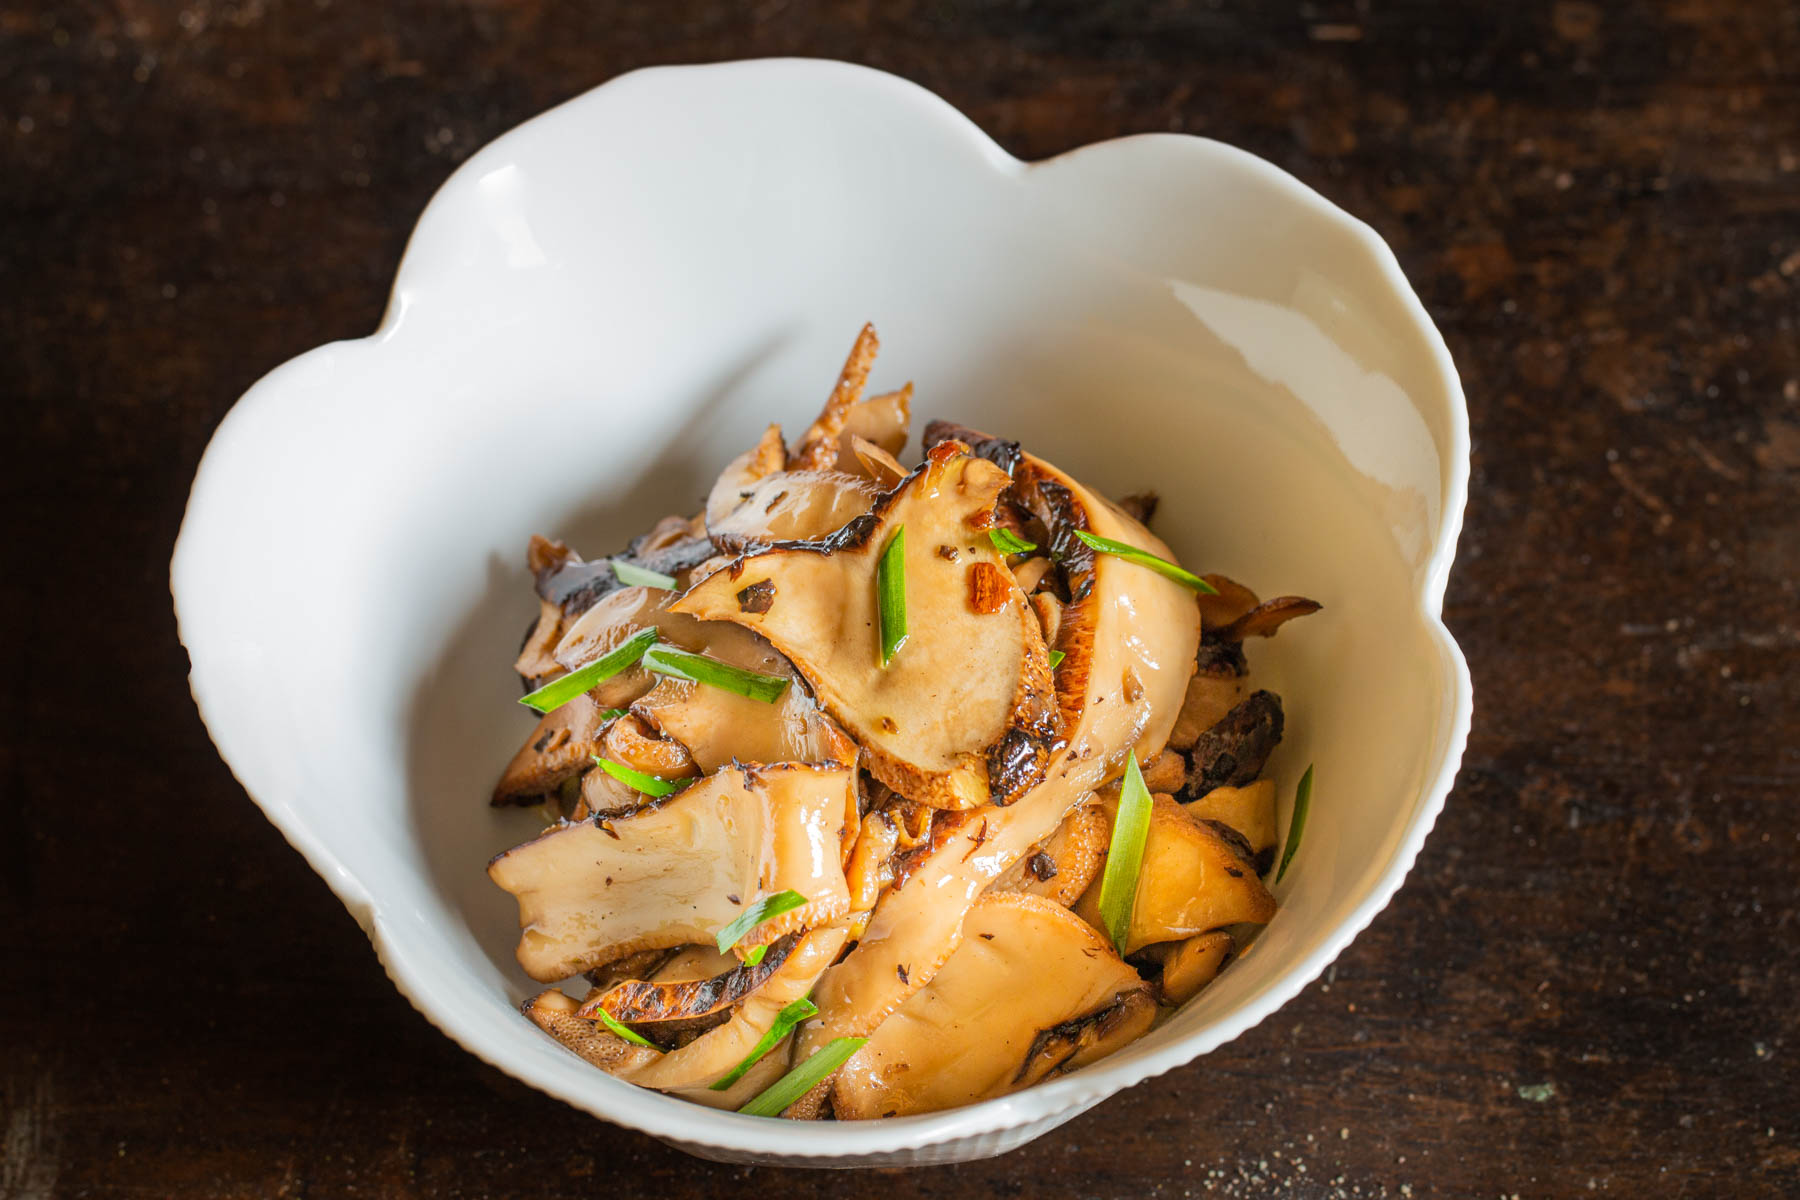 https://foragerchef.com/wp-content/uploads/2020/05/Dryad-saddle-mushrooms-with-ginger-soy-and-onion-greens-6.jpg